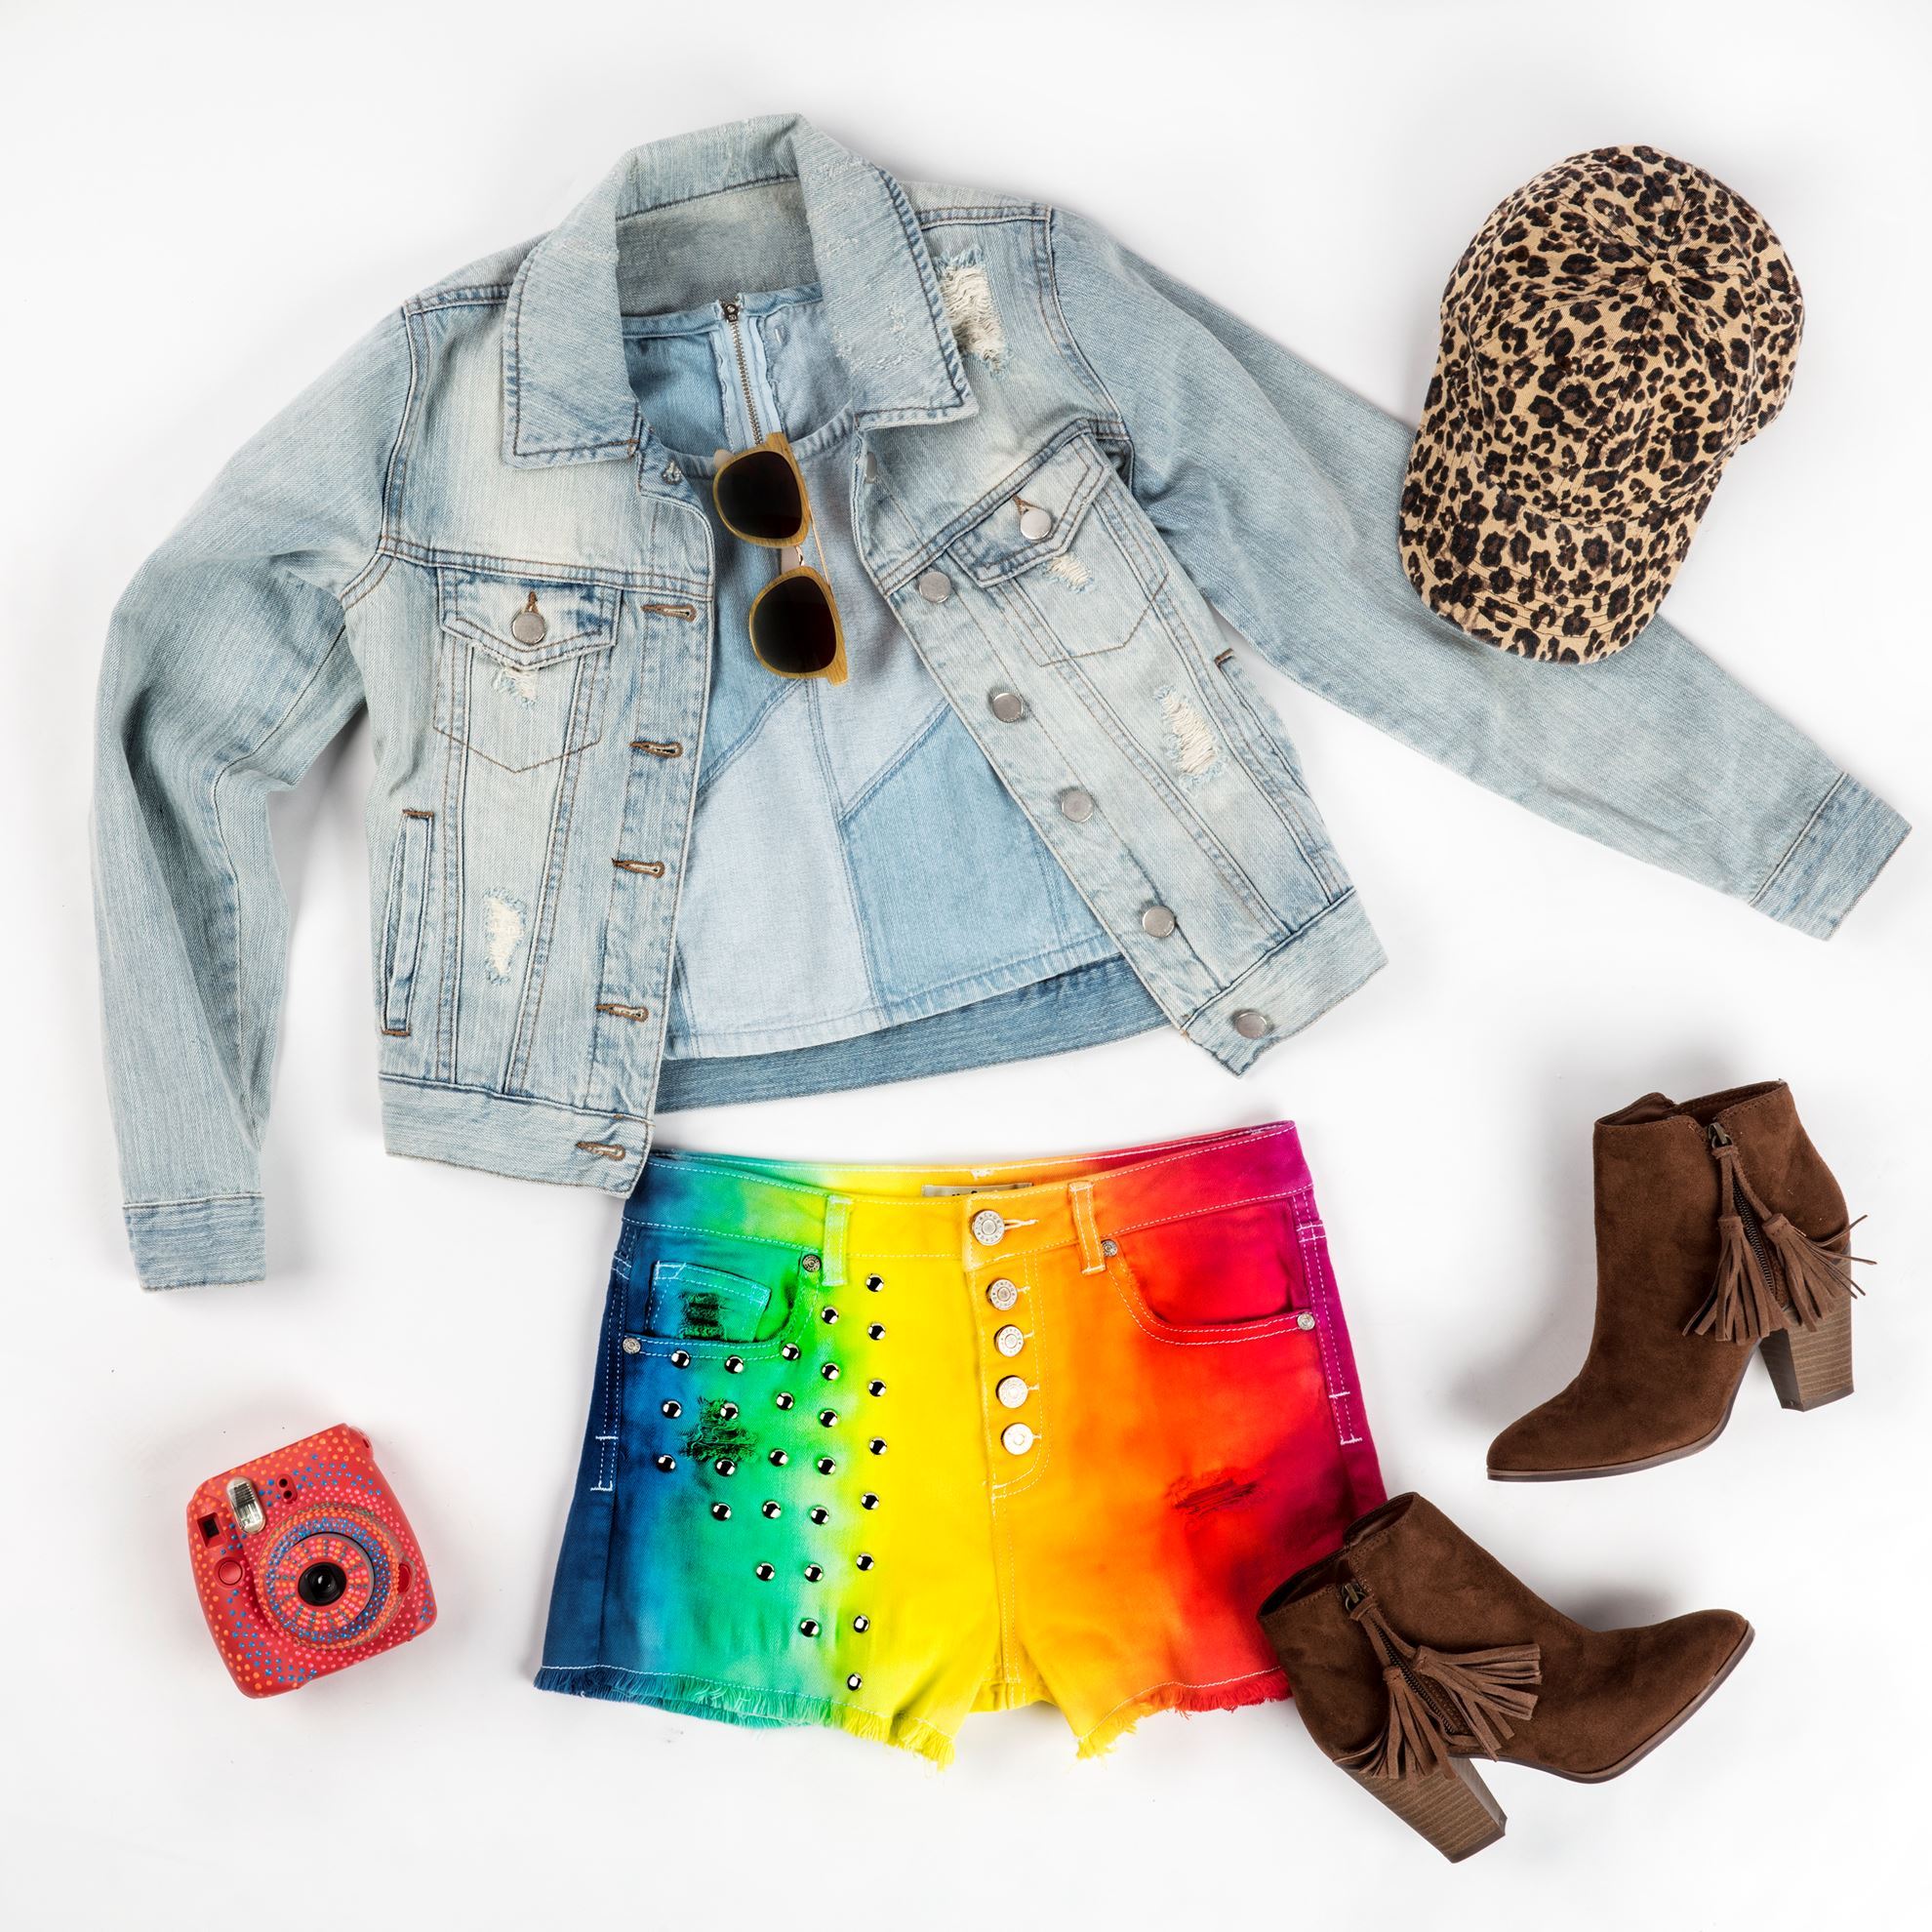 5 Awesome Ombre Tie-Dye Looks